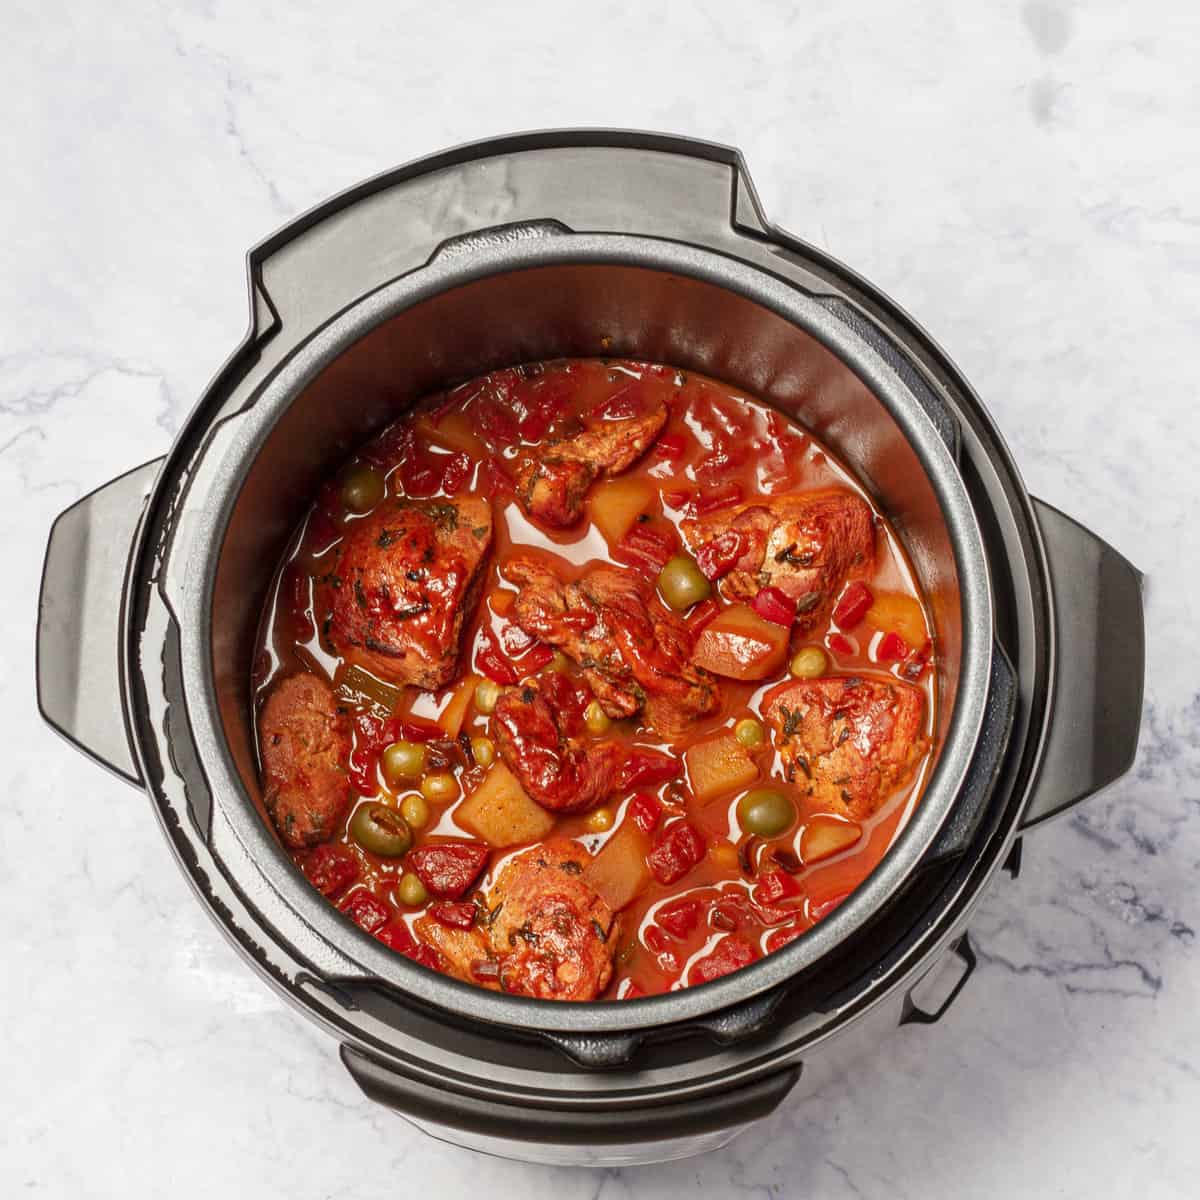 Tomato Paste and diced tomatoes cooking in instant pot